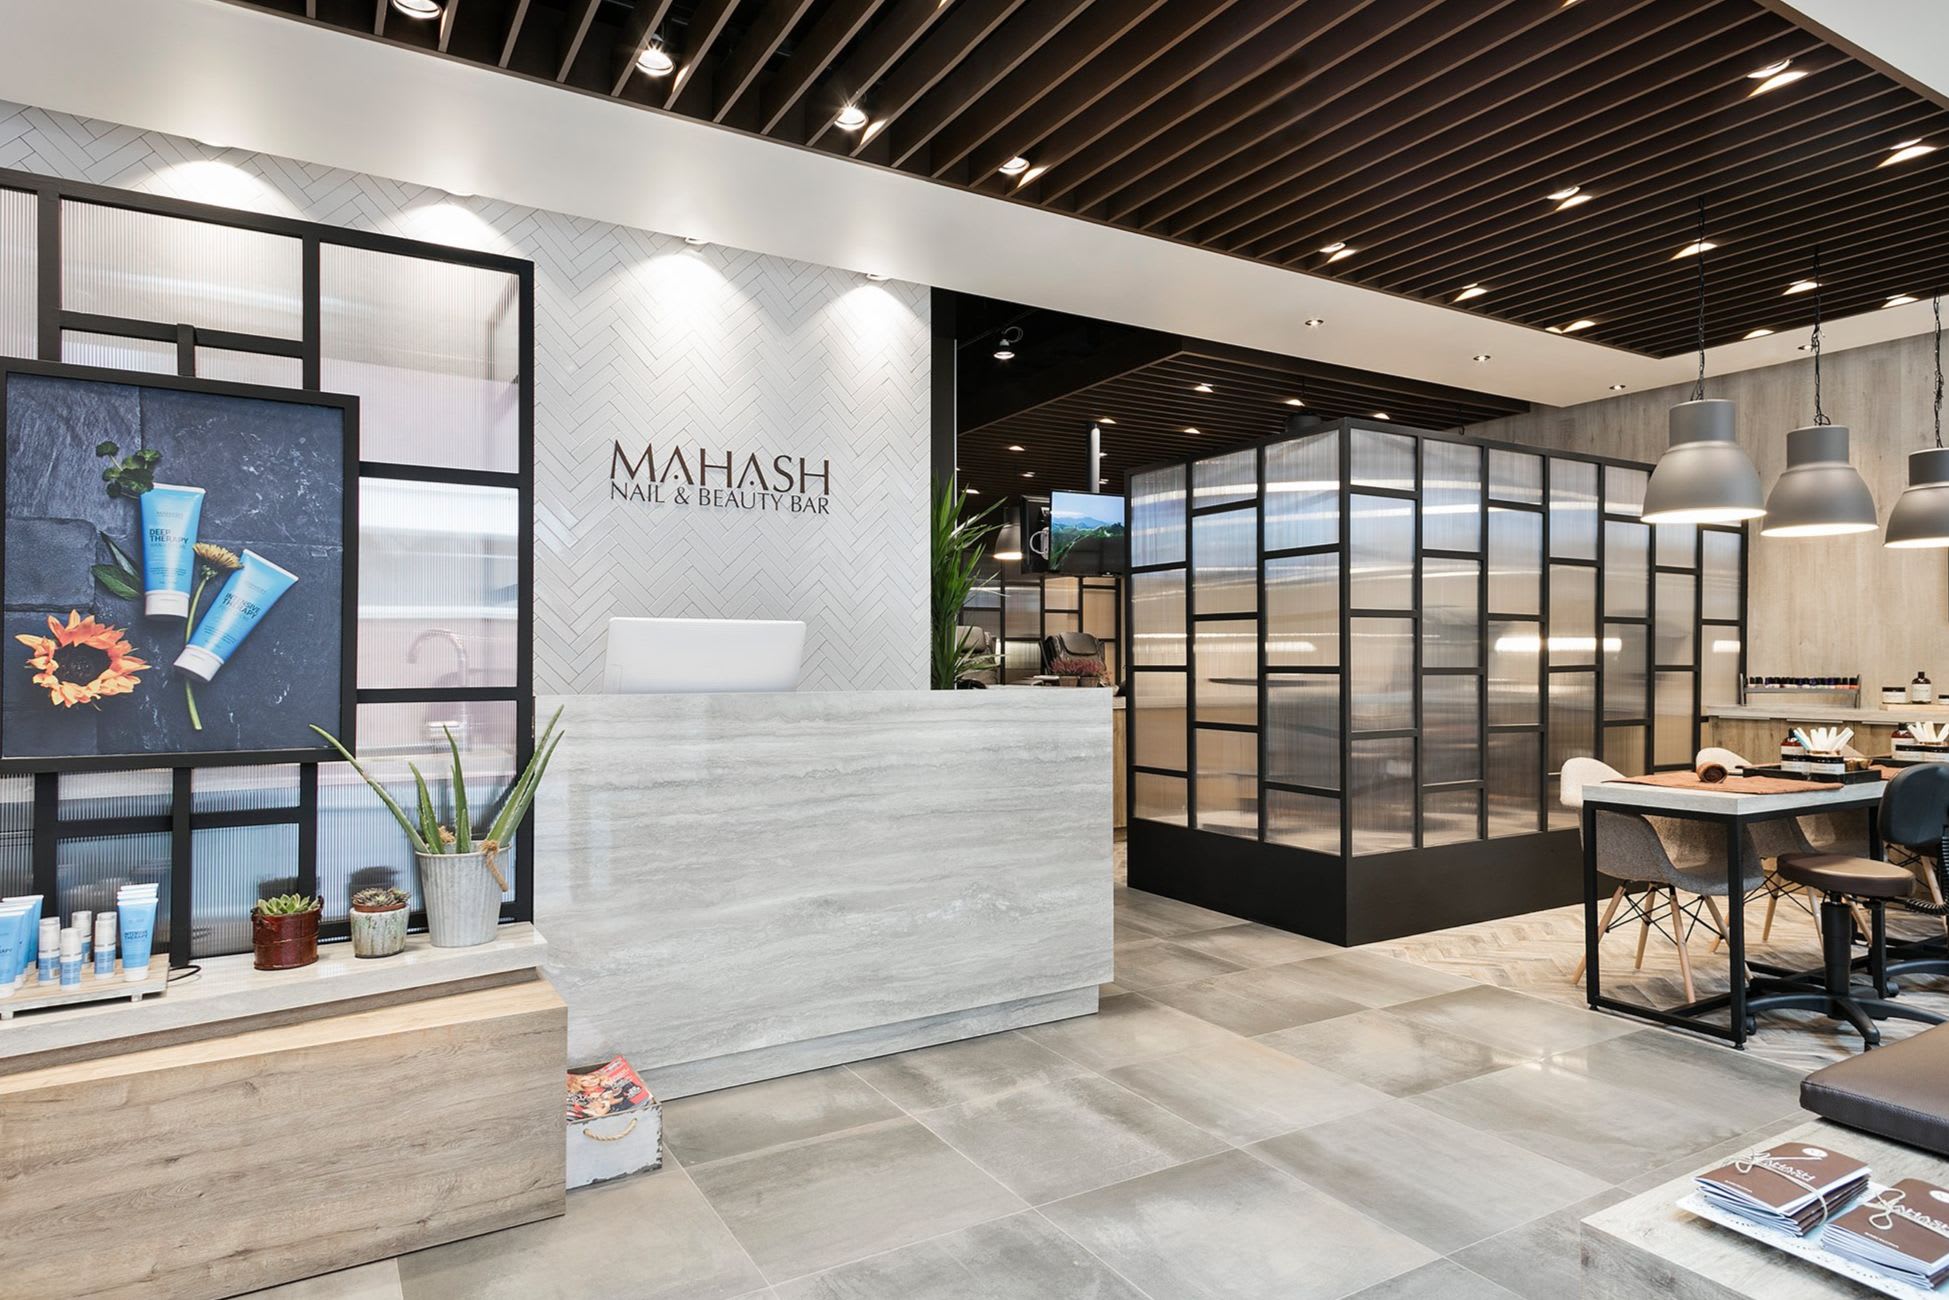 MAHASH NAIL & BEAUTY BAR: Read Reviews and Book Classes on ClassPass